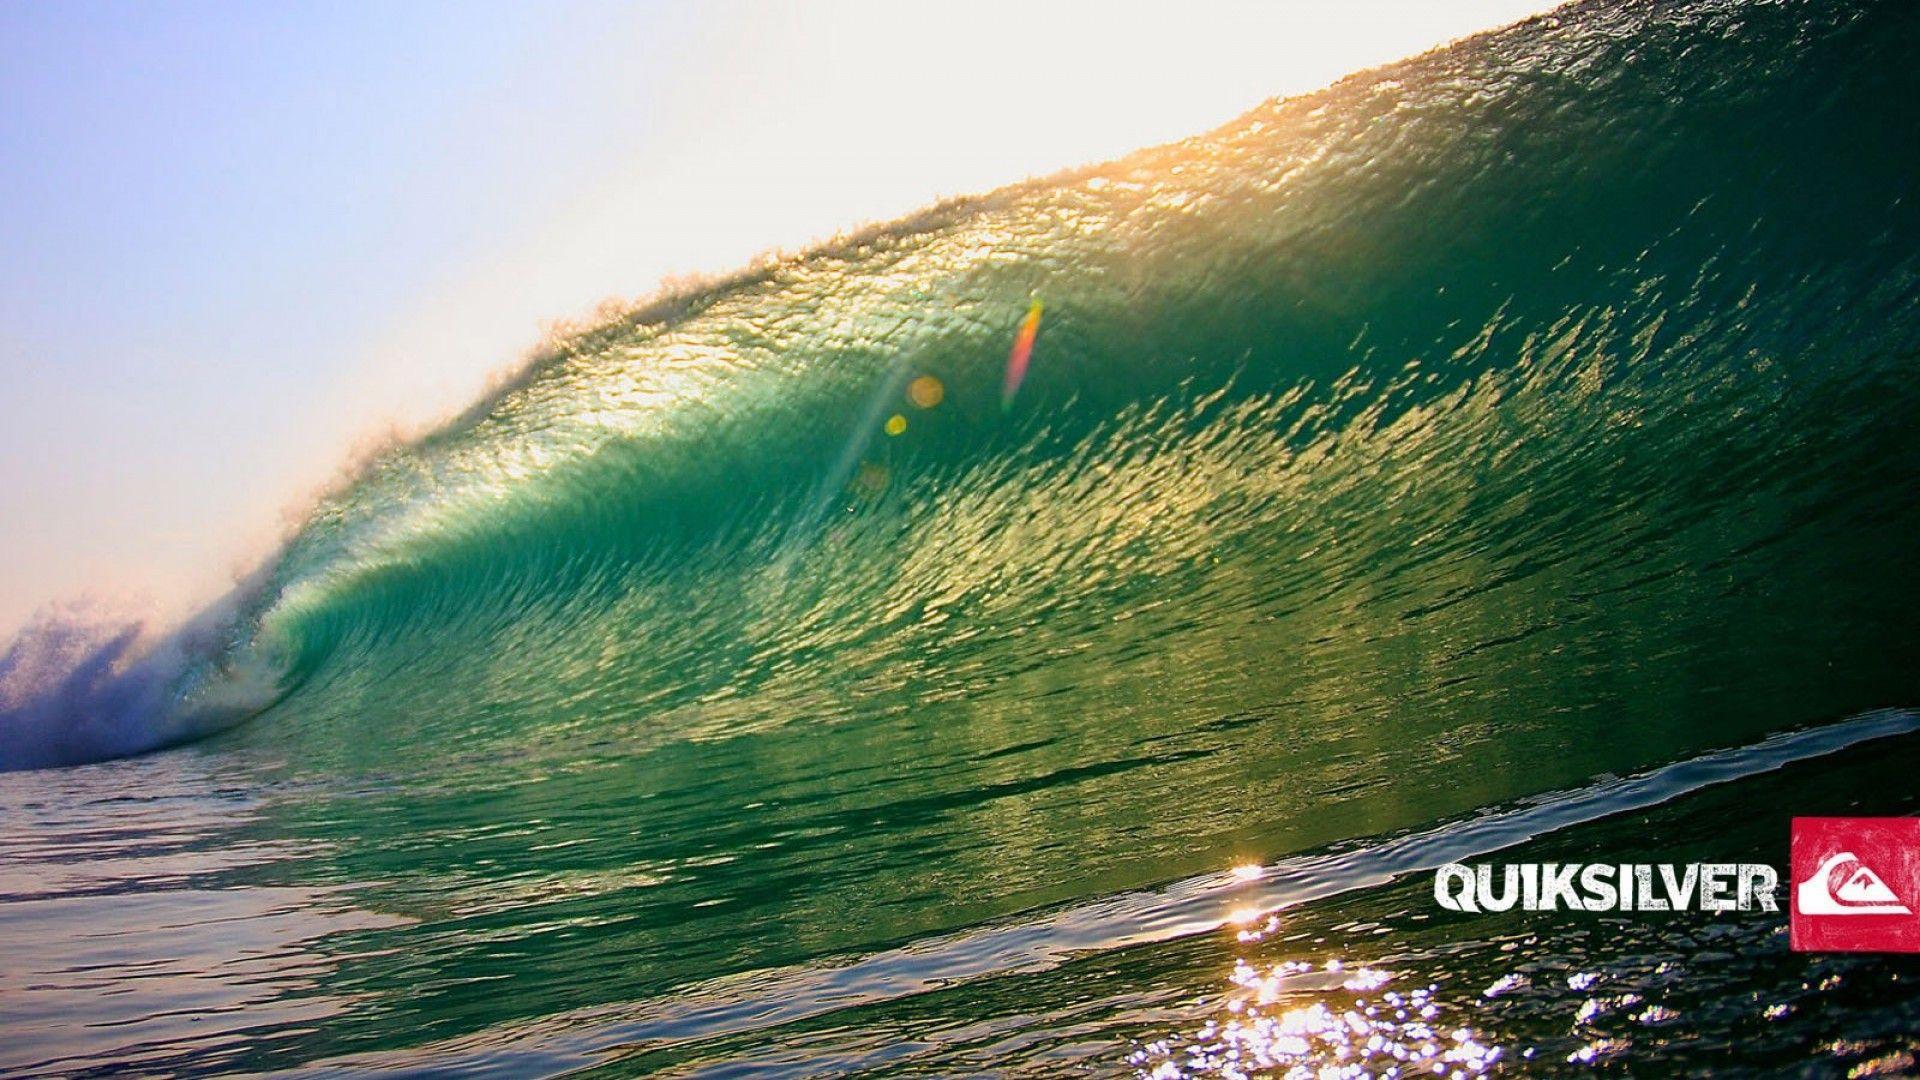 Superb HD Quality Wallpaper's Collection: Quiksilver Wallpaper 36